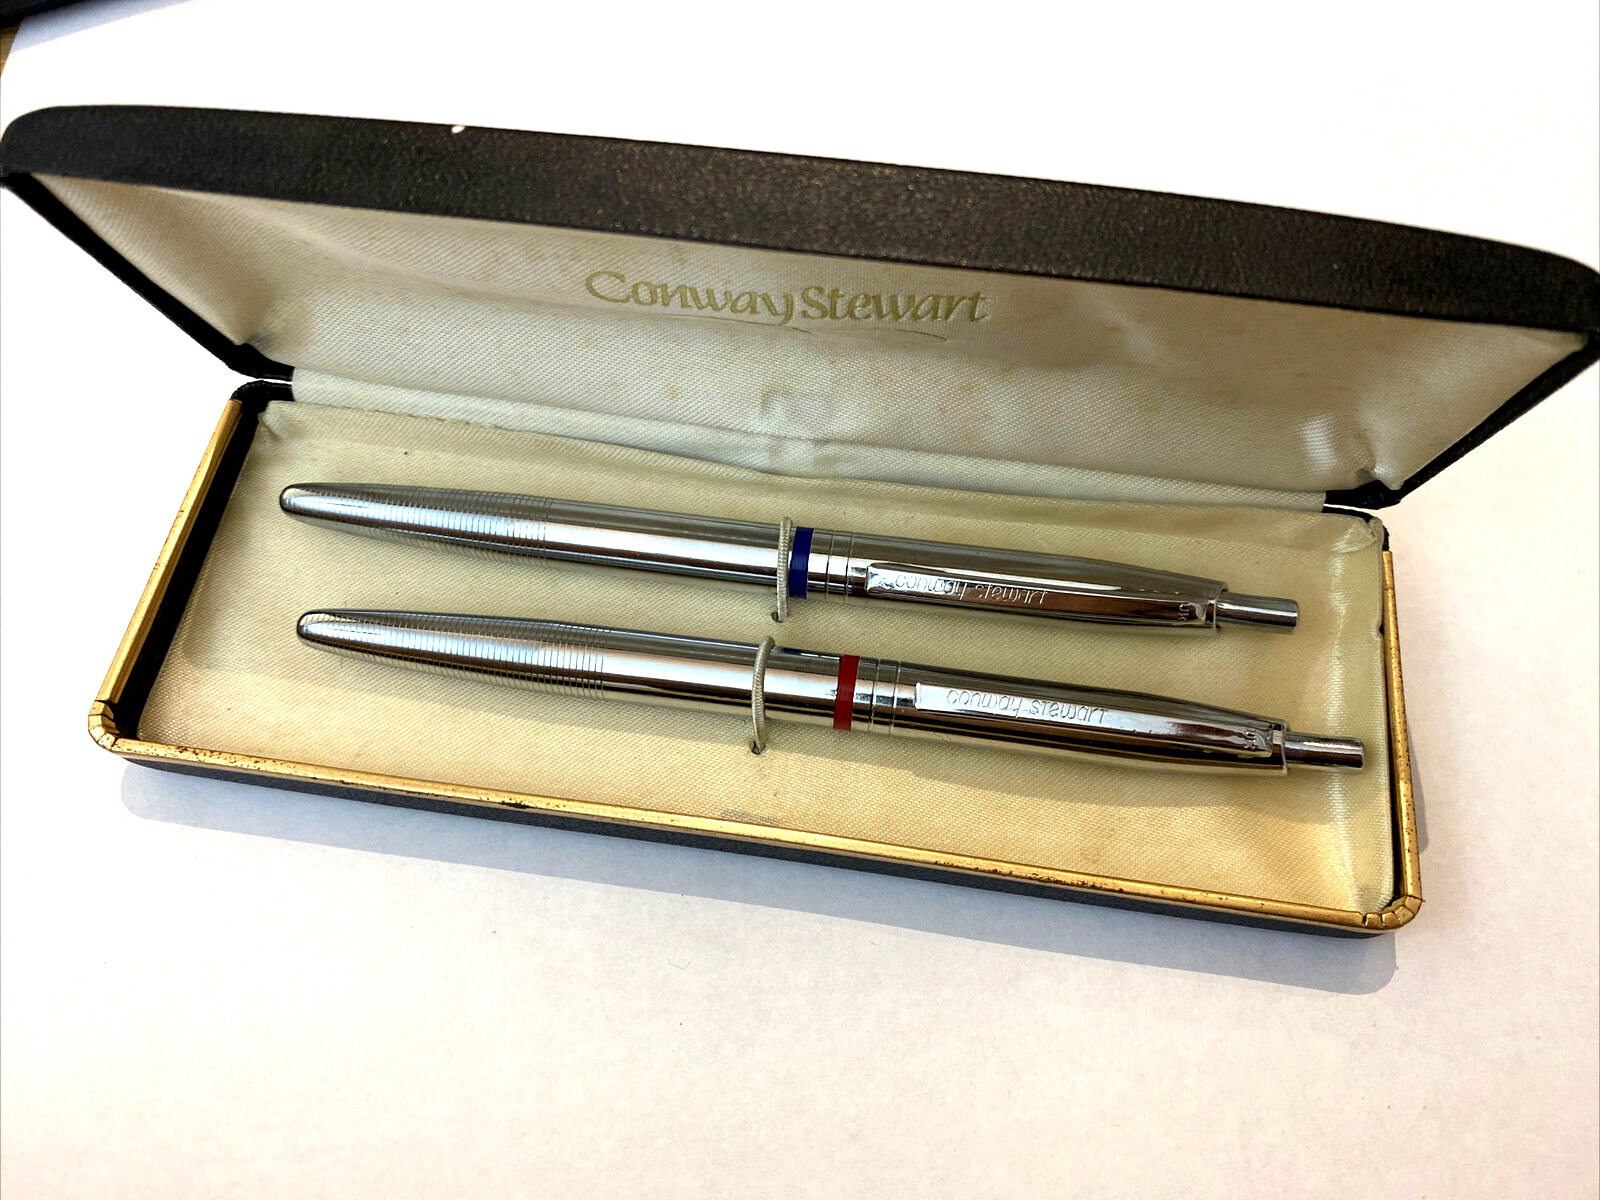 VINTAGE CONWAY STEWART BALLPOINT PEN SET IN BOX IN BLUE AND RED MADE IN ENGLAND